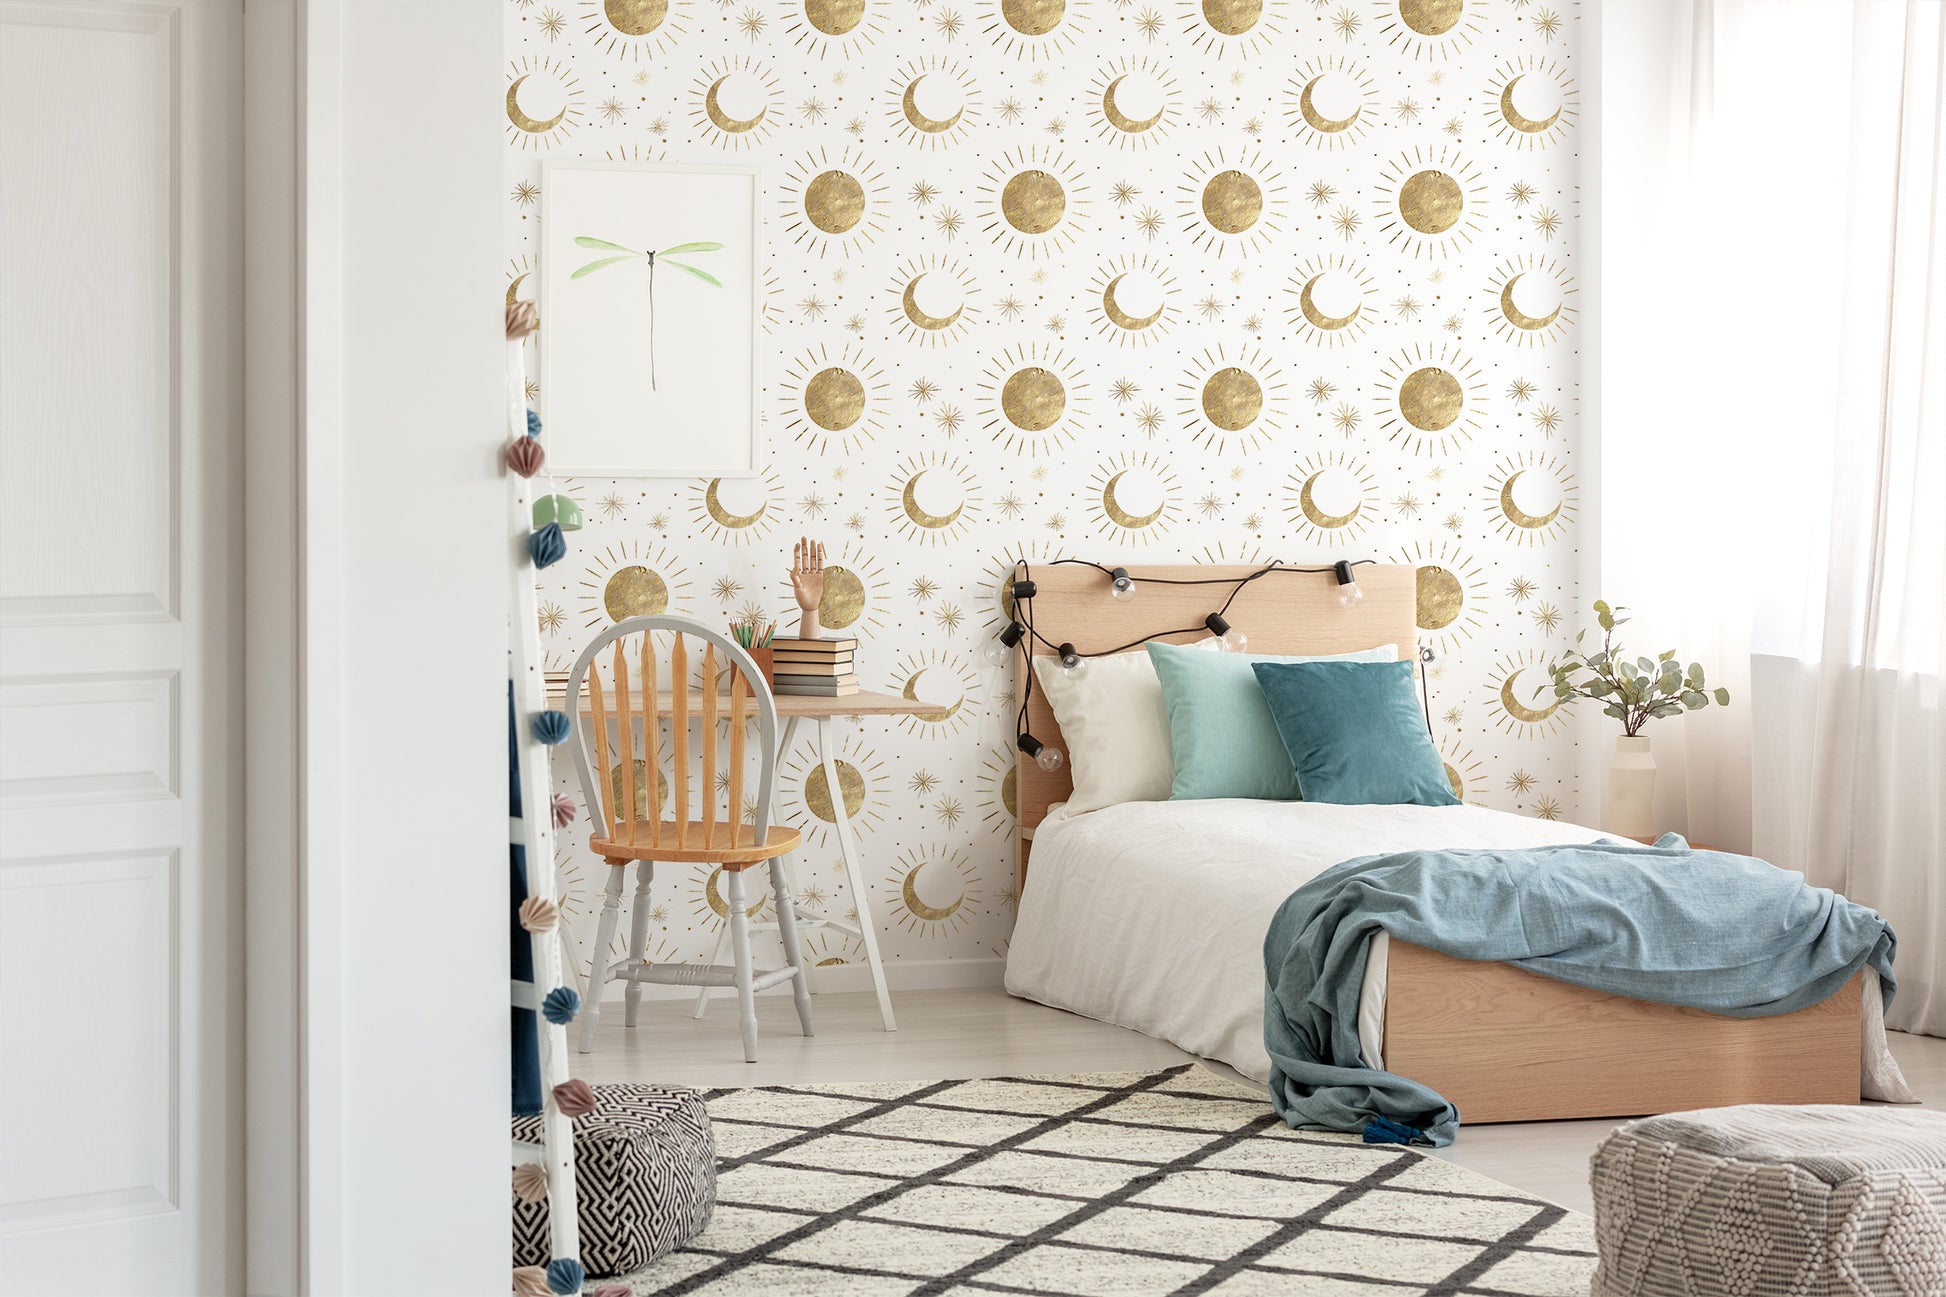 sun, moon, and stars removable peel and stick wallpaper in bedroom